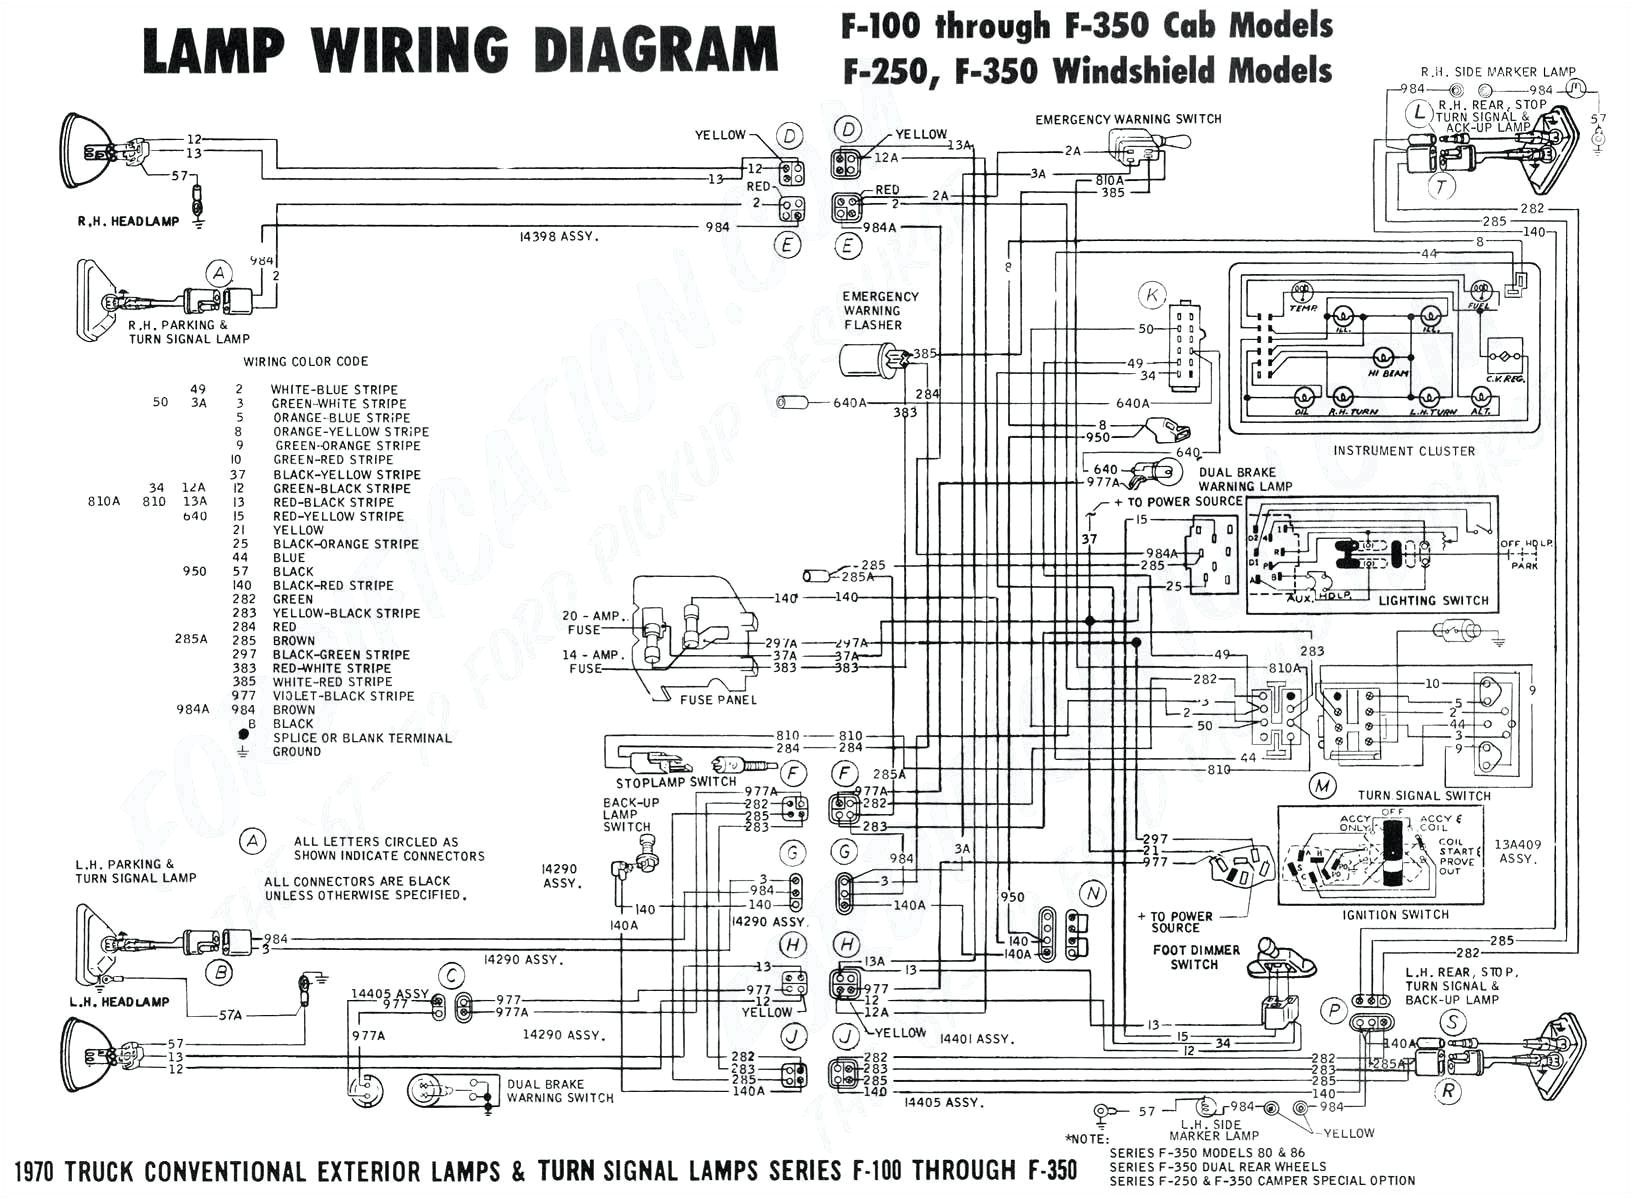 ignition switch diagram wiring diagram centre dodge ram ignition diagram wiring diagram paper ignition switch